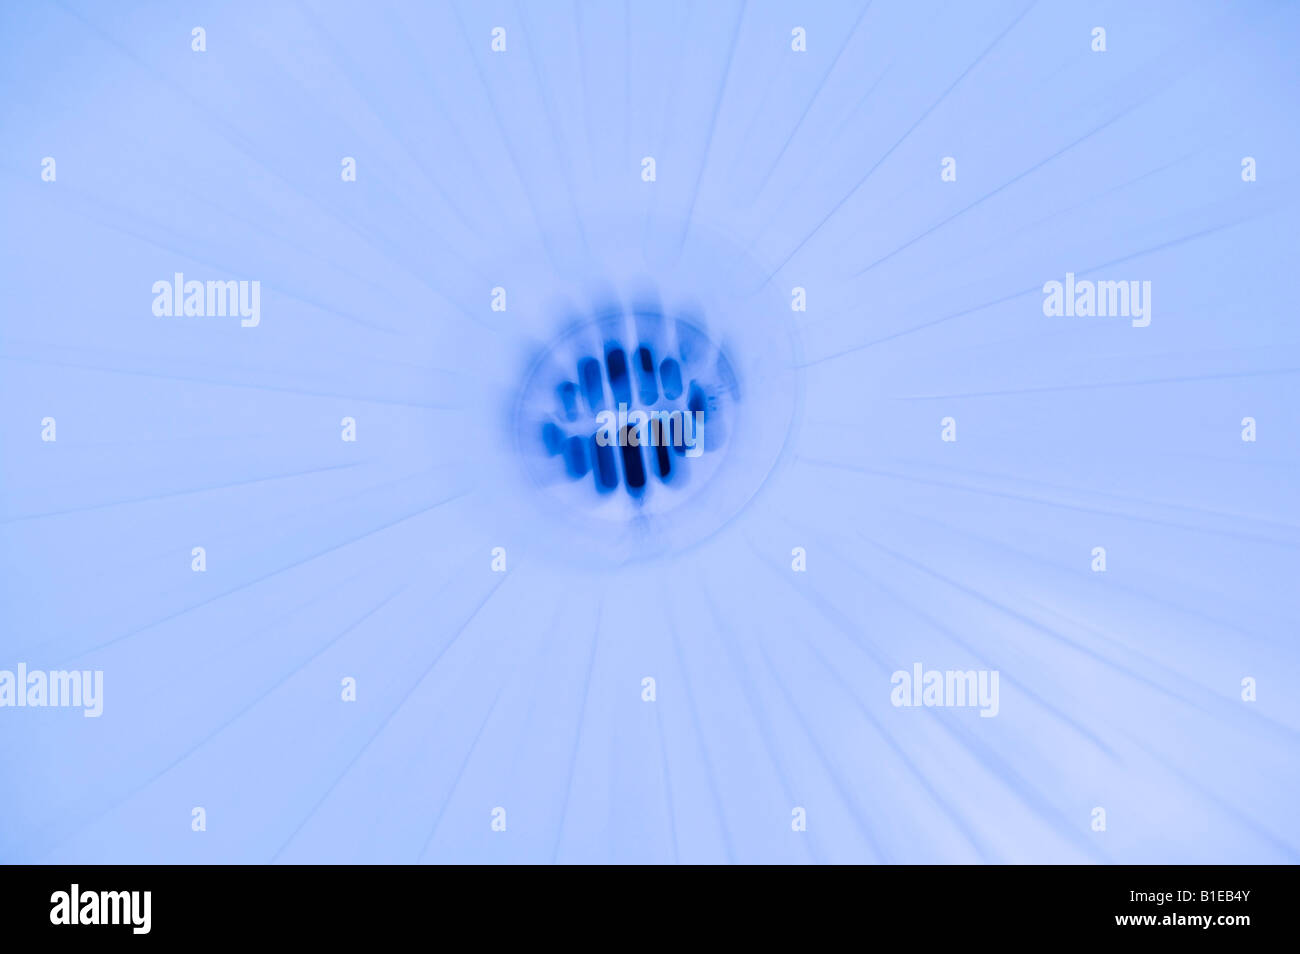 Blurred image of shower drain in blue light USA Stock Photo